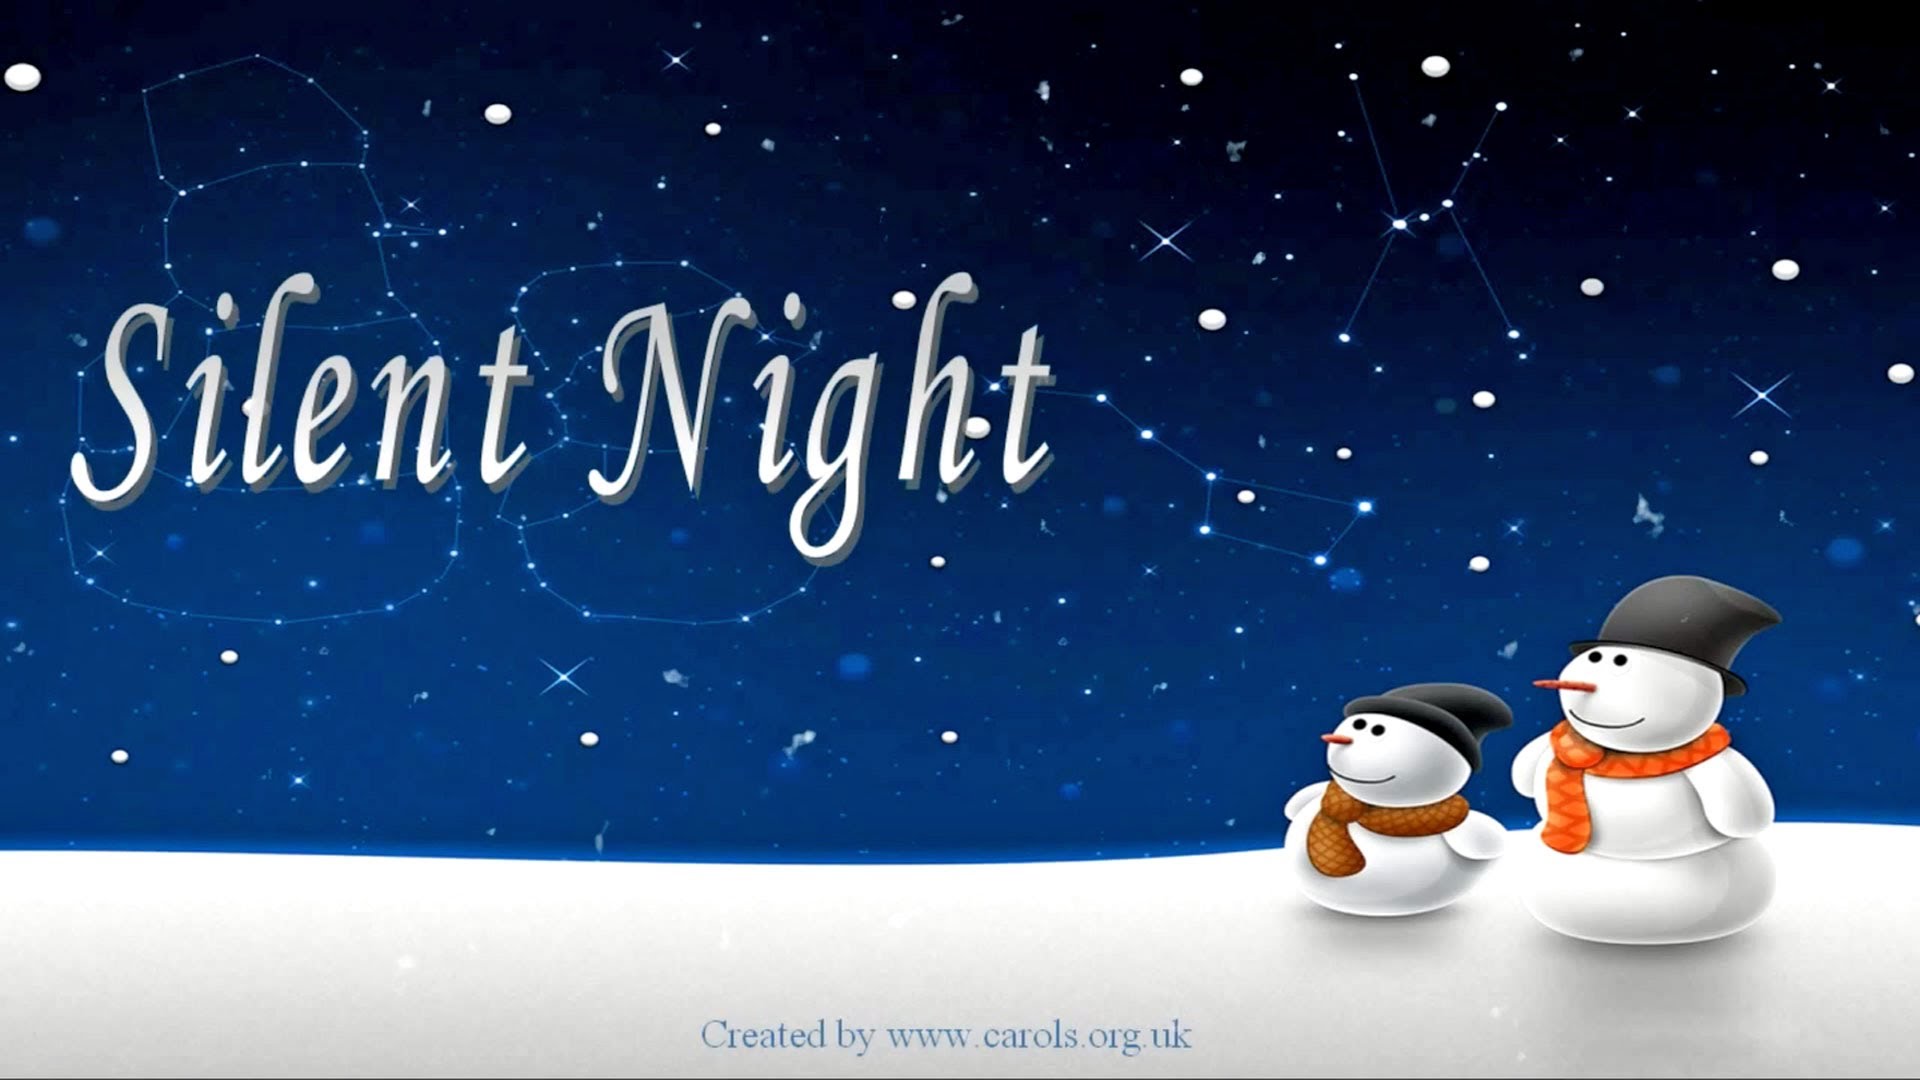 Silent Night Wallpapers, Movie, Hq Silent Night Pictures | 4K